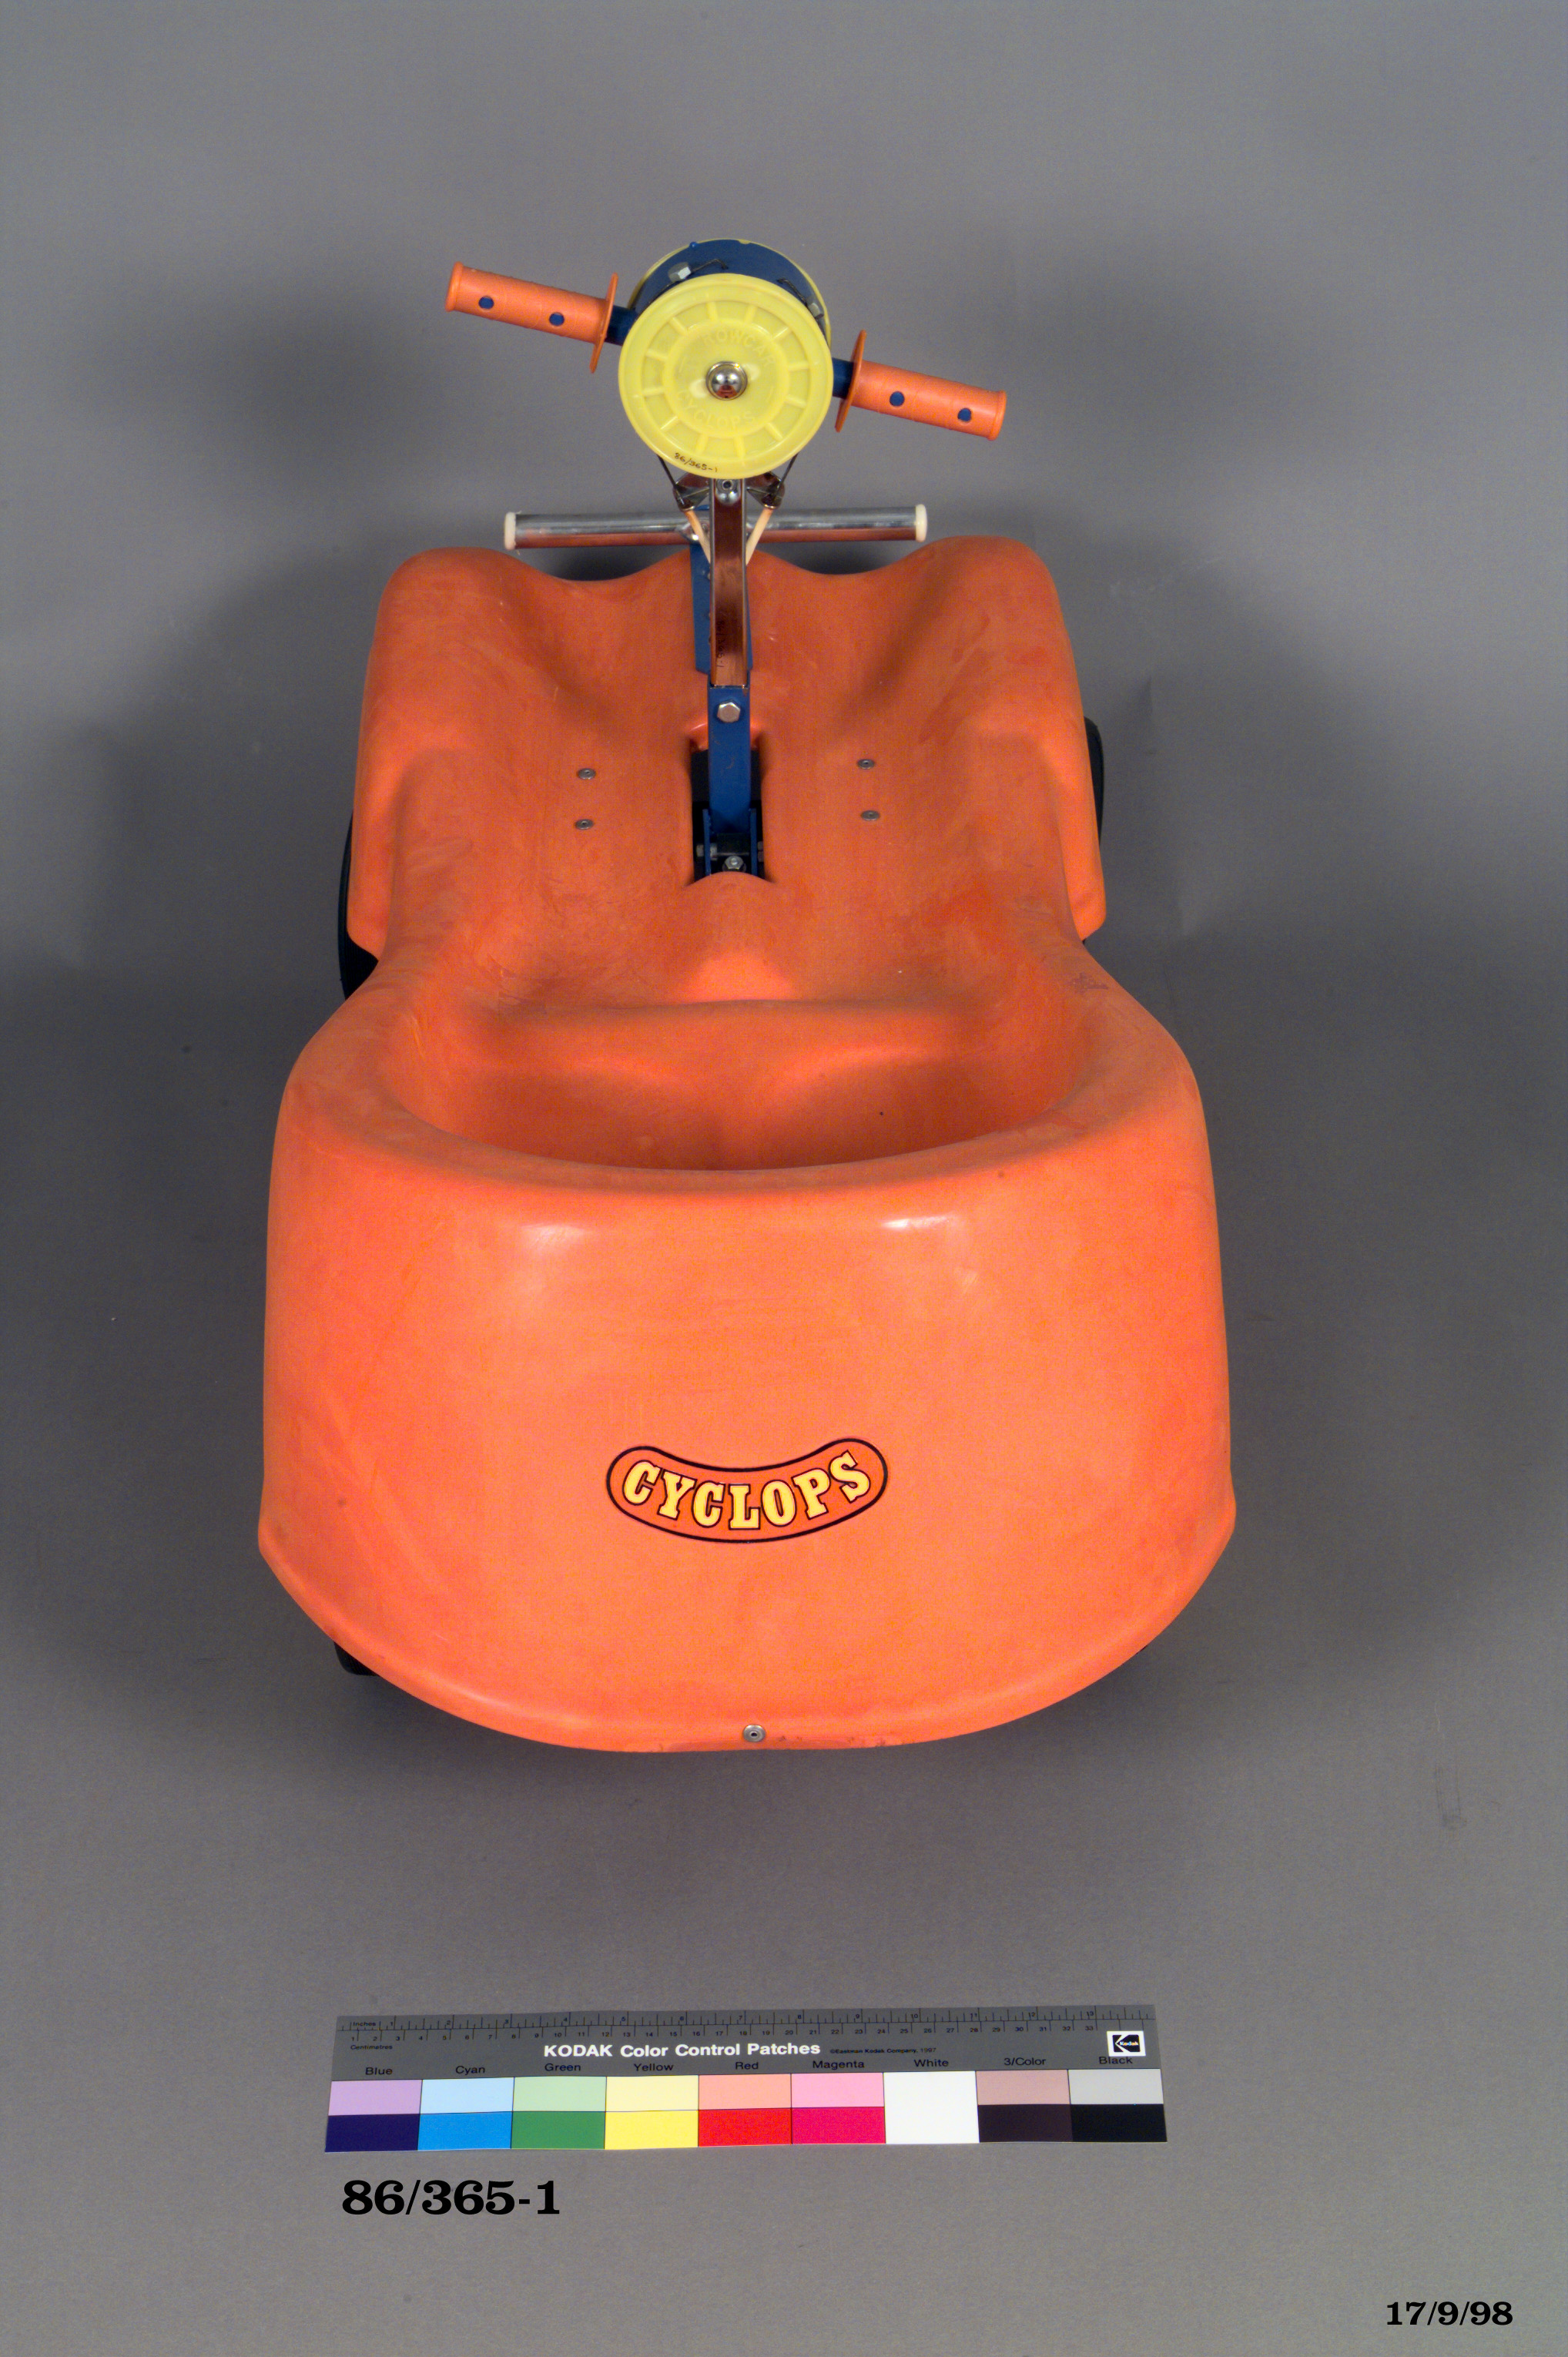 Cyclops 'Rowcar' disabled child's ride-on toy